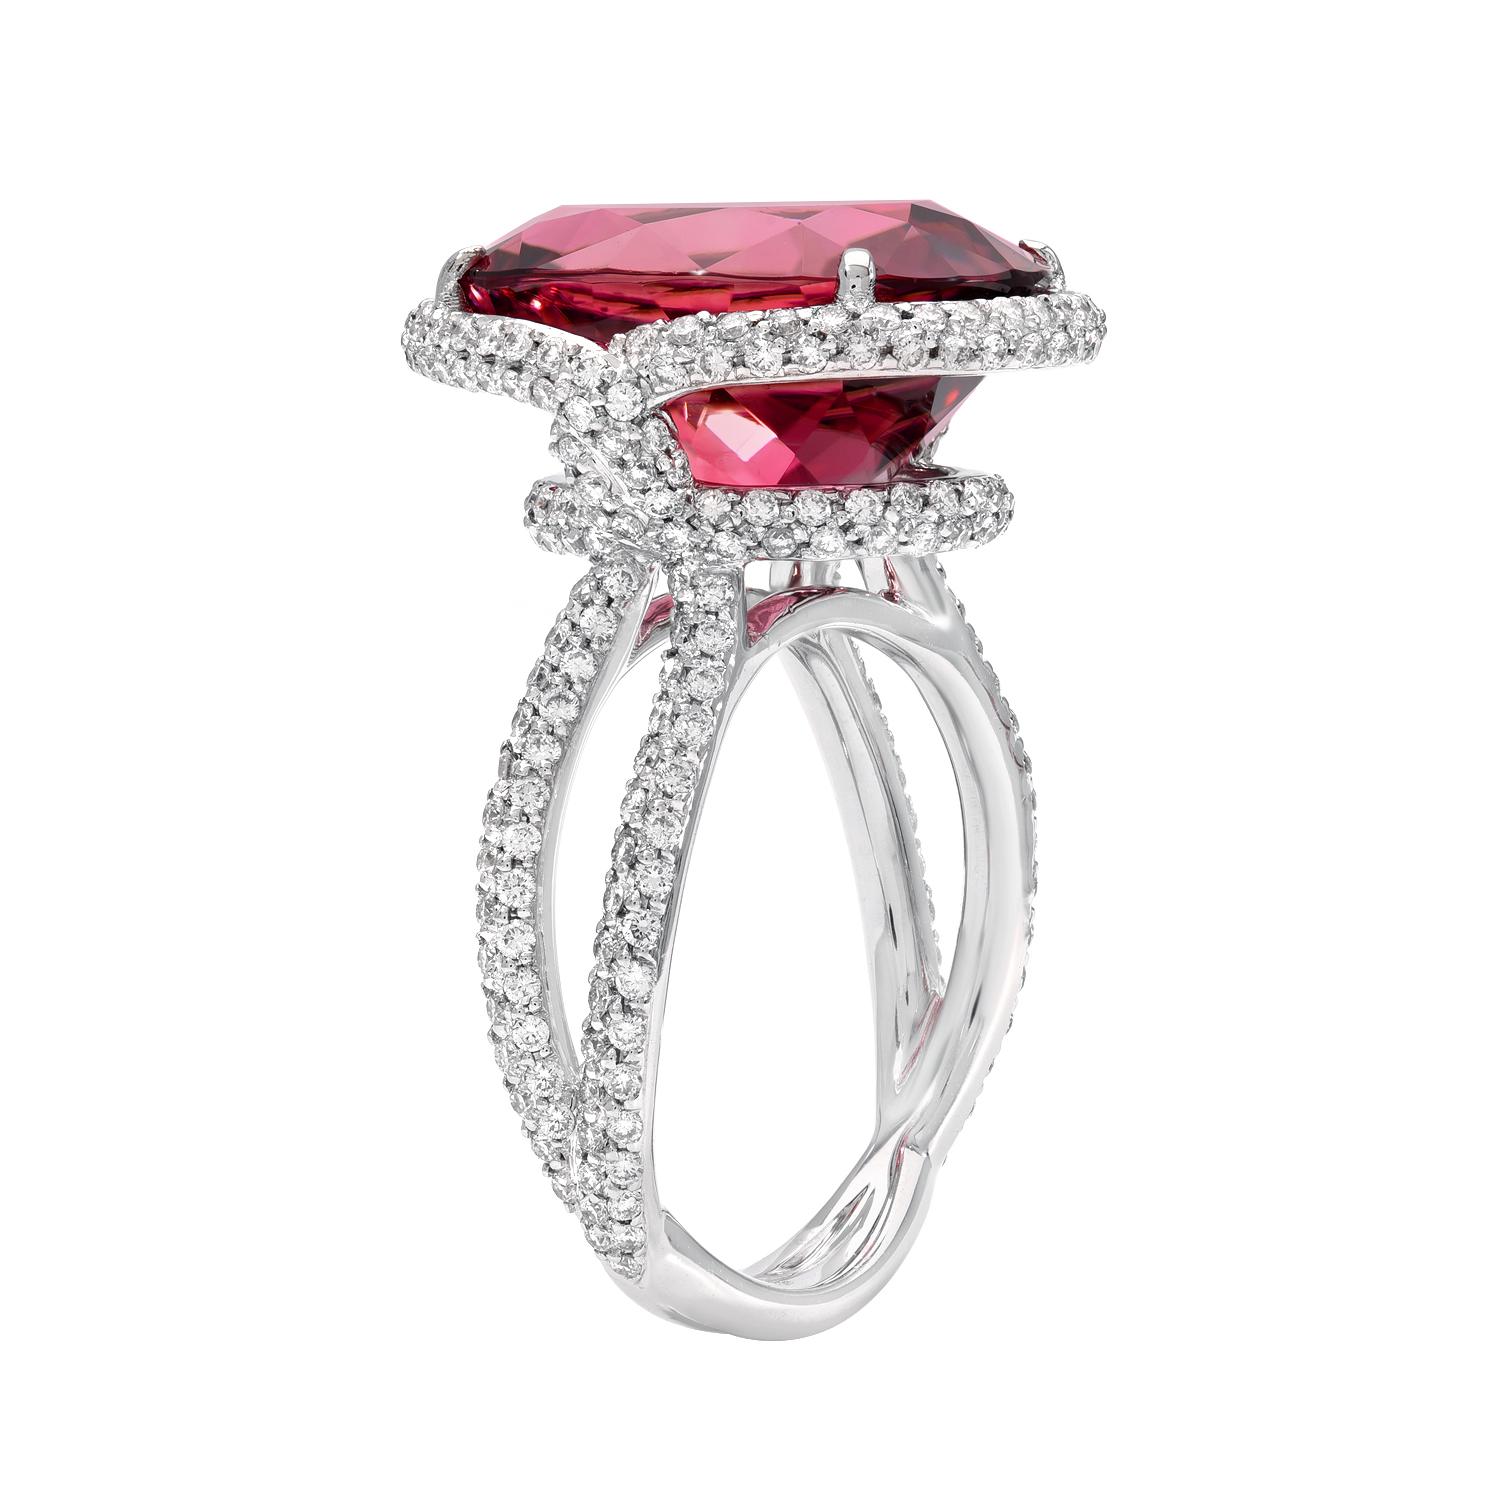 White gold diamond ring showcasing a spectacular 11.69 carat oval Rubellite Tourmaline, accented by a total of 1.16 carat round brilliant diamonds. 
Crafted in 18K white gold.
Size 6. Resizing is complementary upon request. 
Returns are accepted and